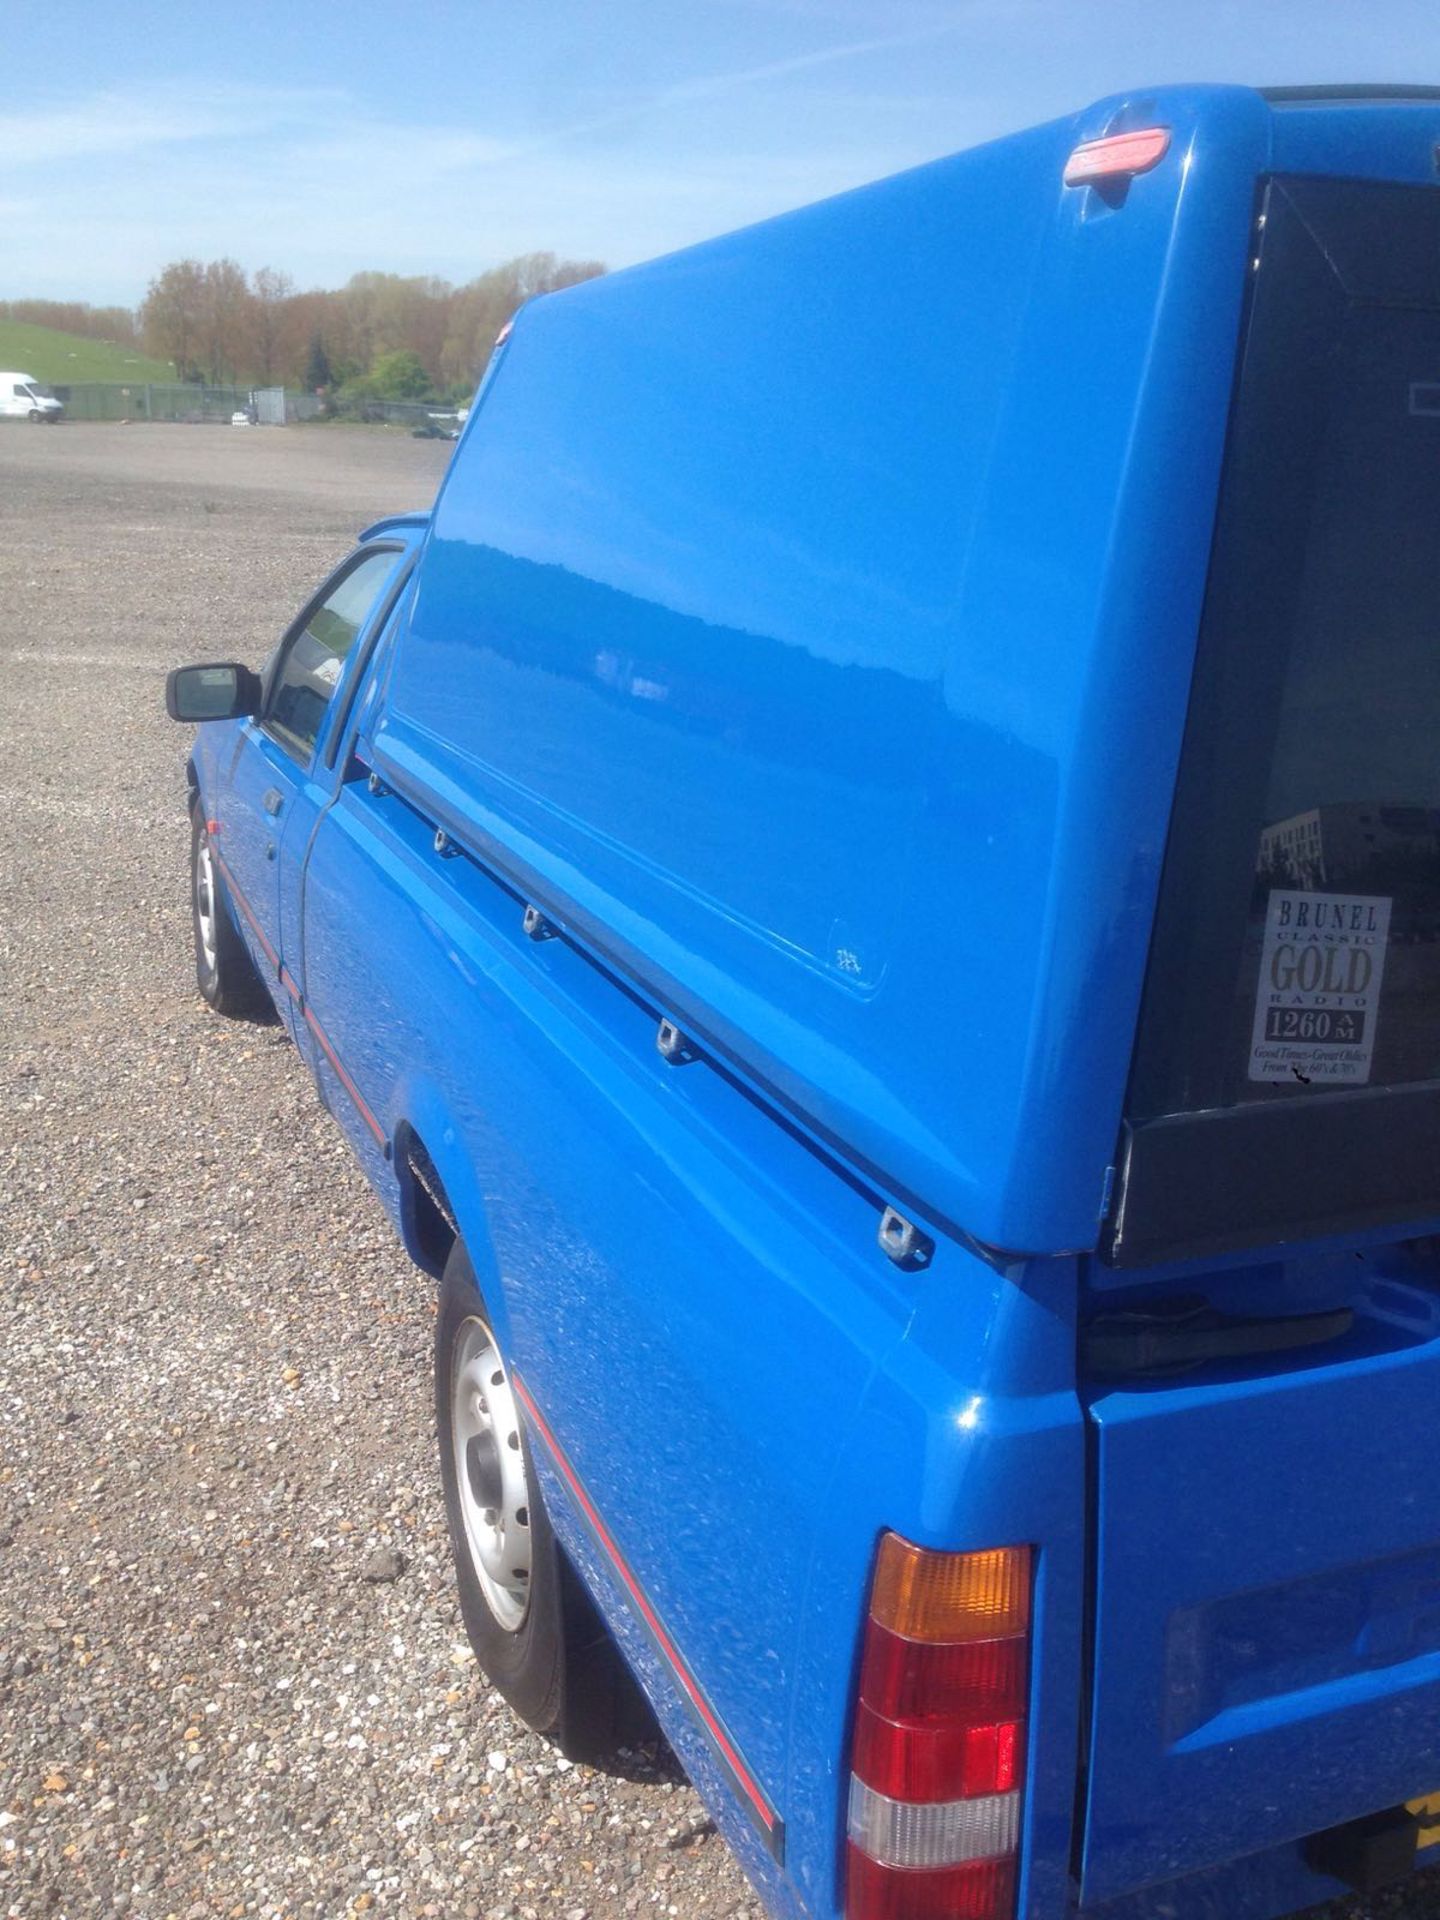 Ford P100 pickup, 1.8 turbo diesel 1991/J 39,000 miles with truckman top 2 owners - Image 8 of 14